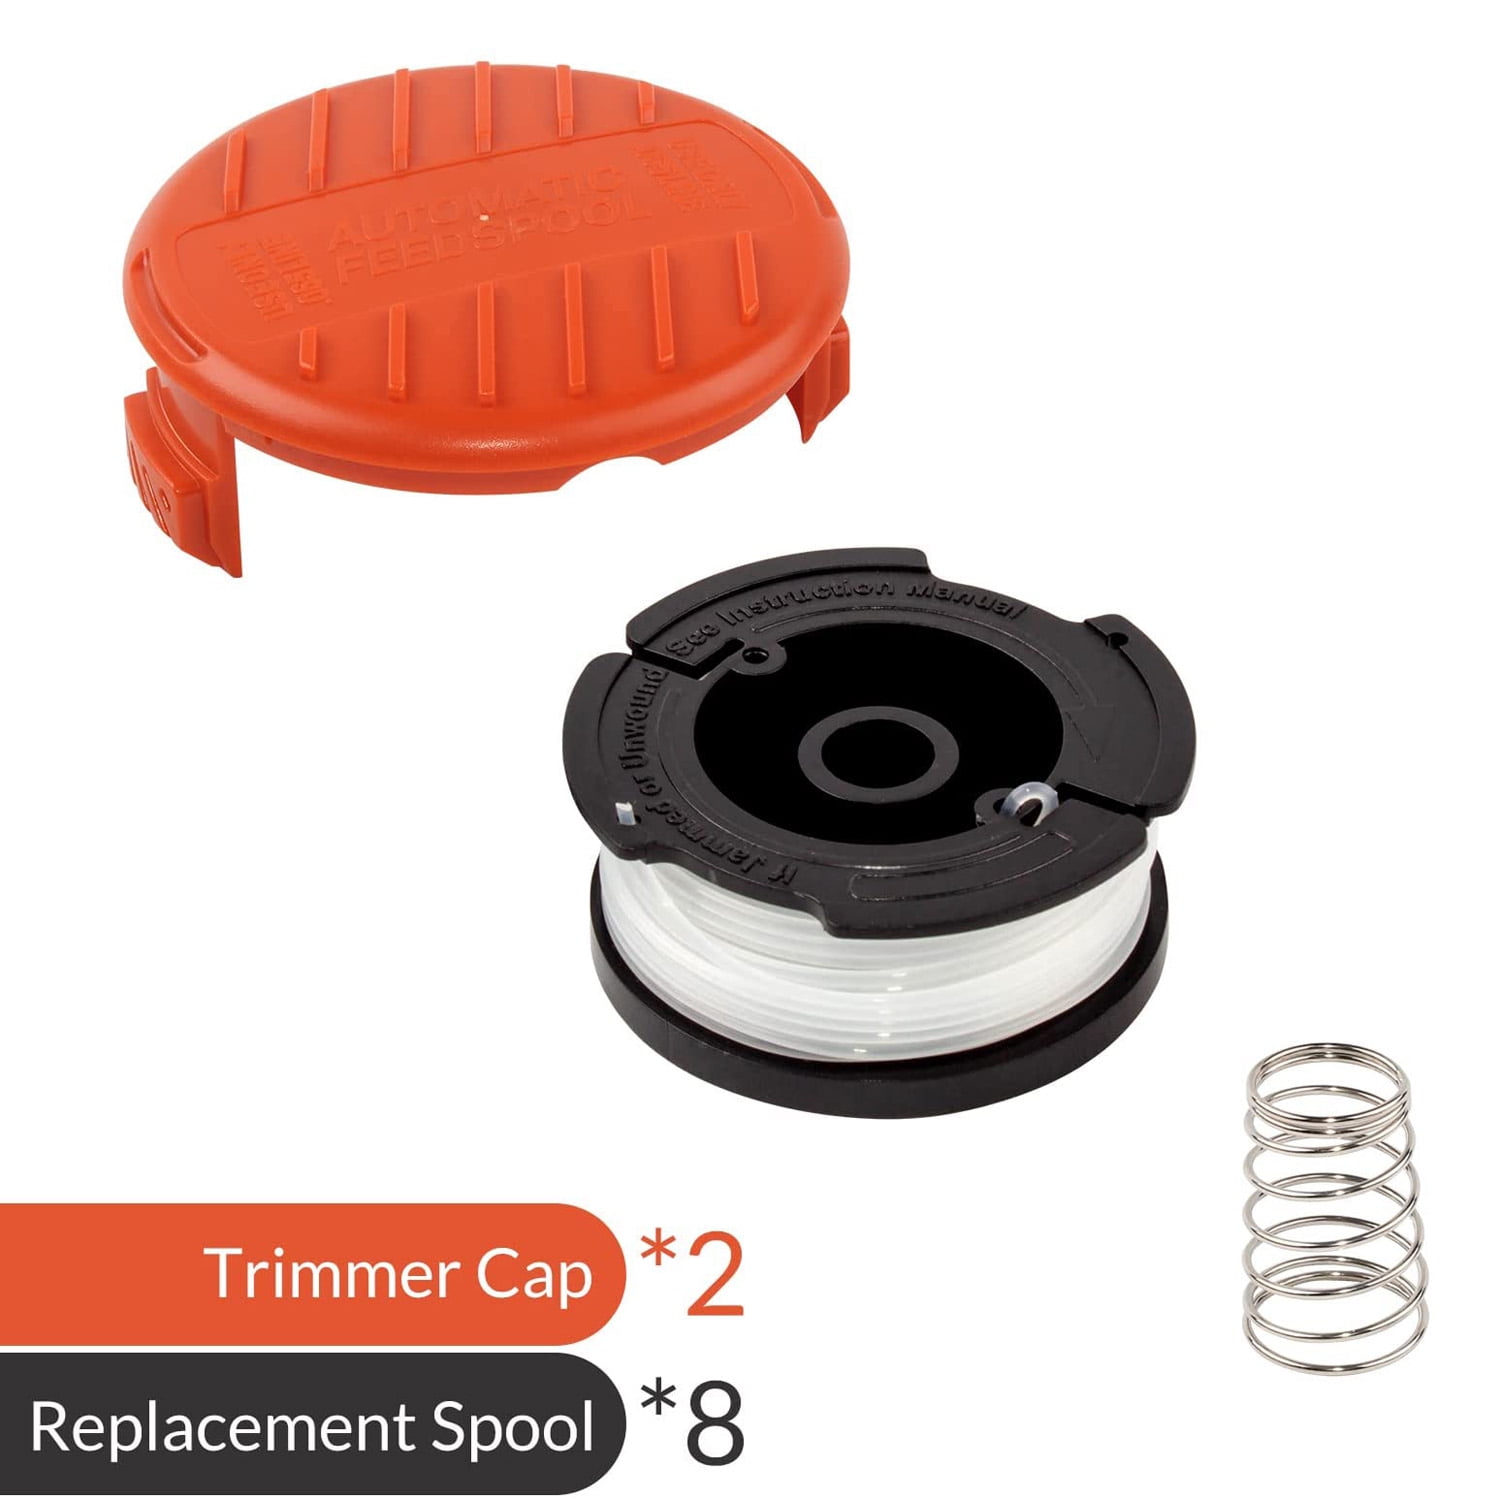 Yesjoy Trimmer Replacement Autofeed Trimmer Spool Line 30ft 0.065 String Trimmer Replacement Spool for Black+Decker String Trimmers  8 Line Spool, 2 Caps 